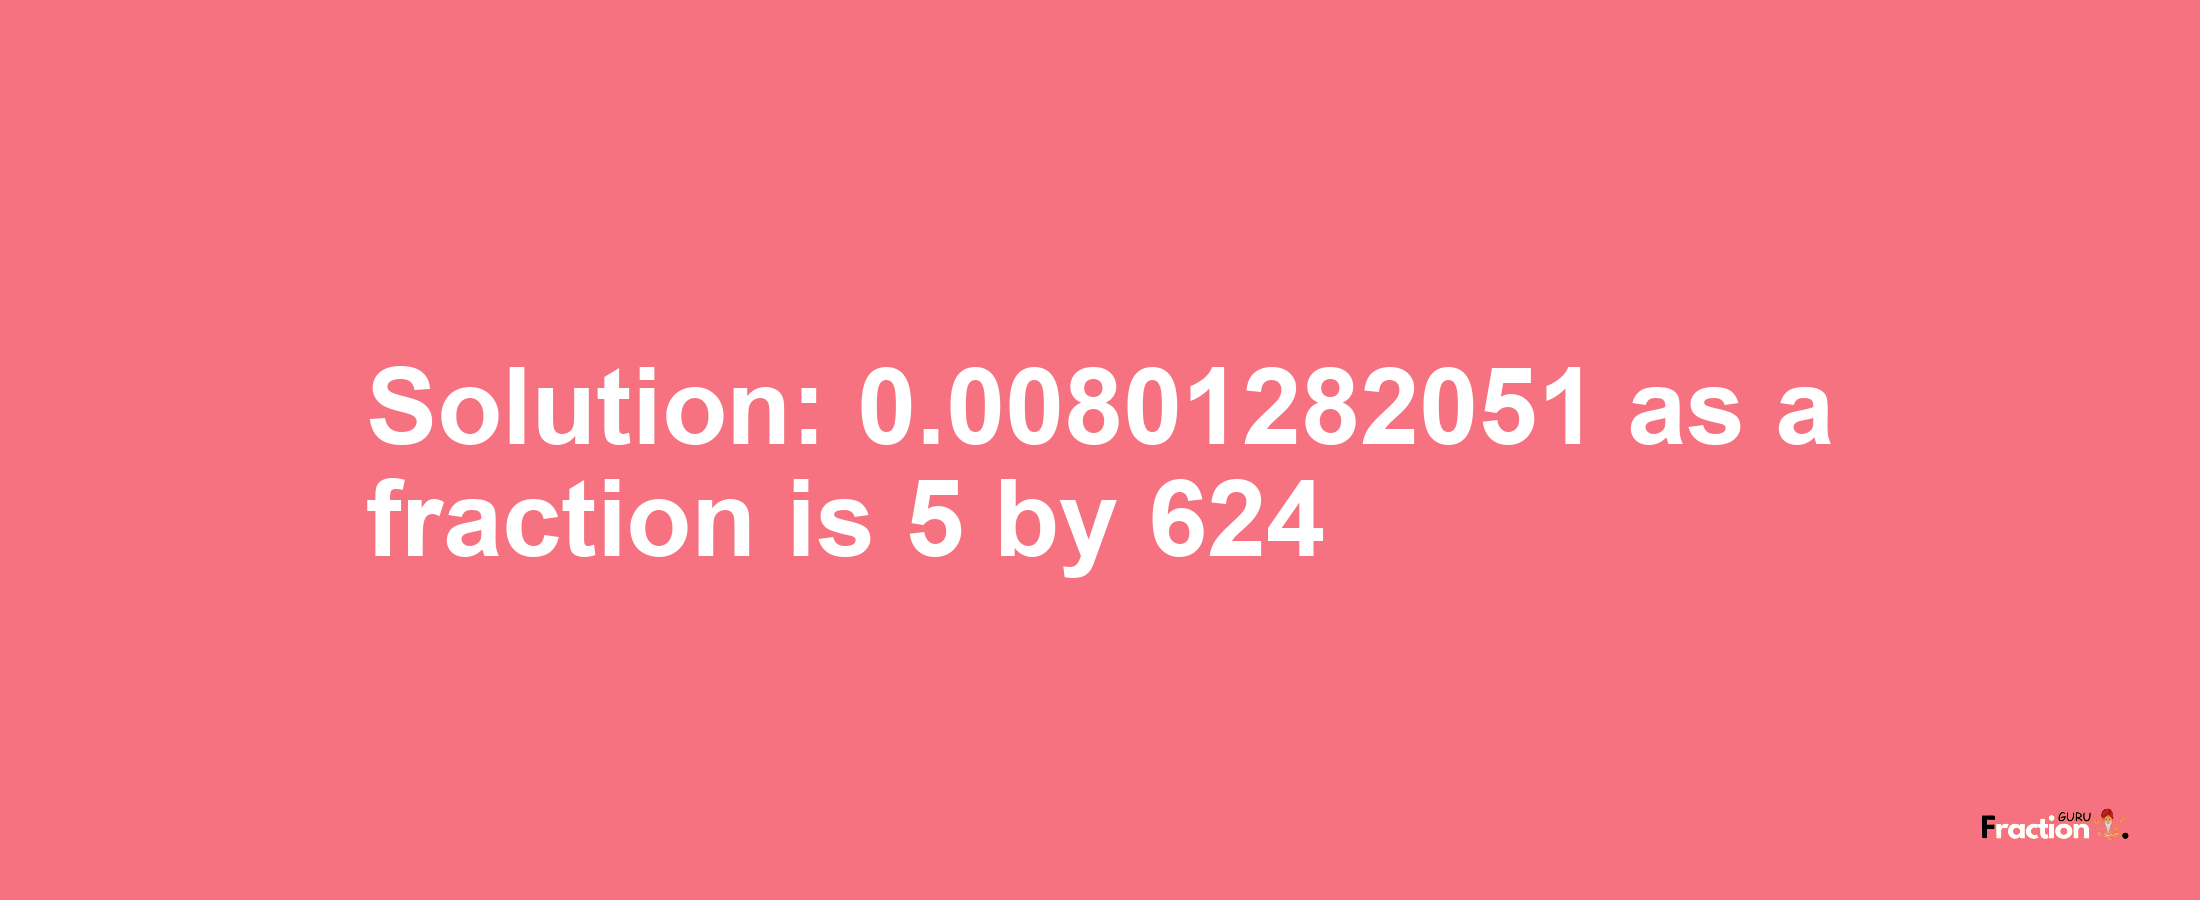 Solution:0.00801282051 as a fraction is 5/624